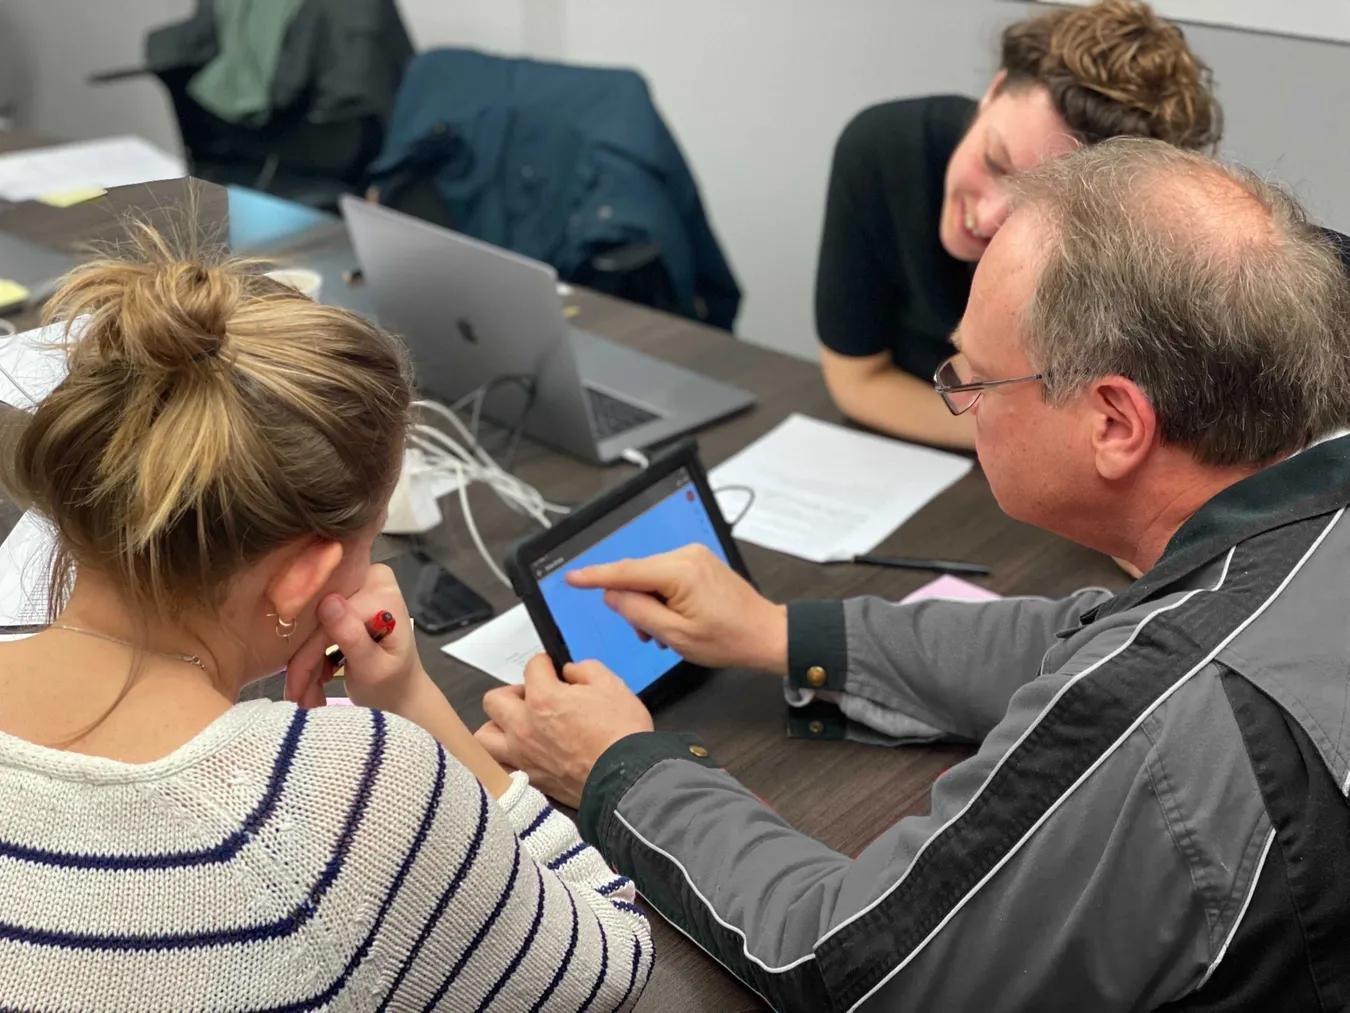 Two people in a user test, in which one subject performs the test on a tablet.